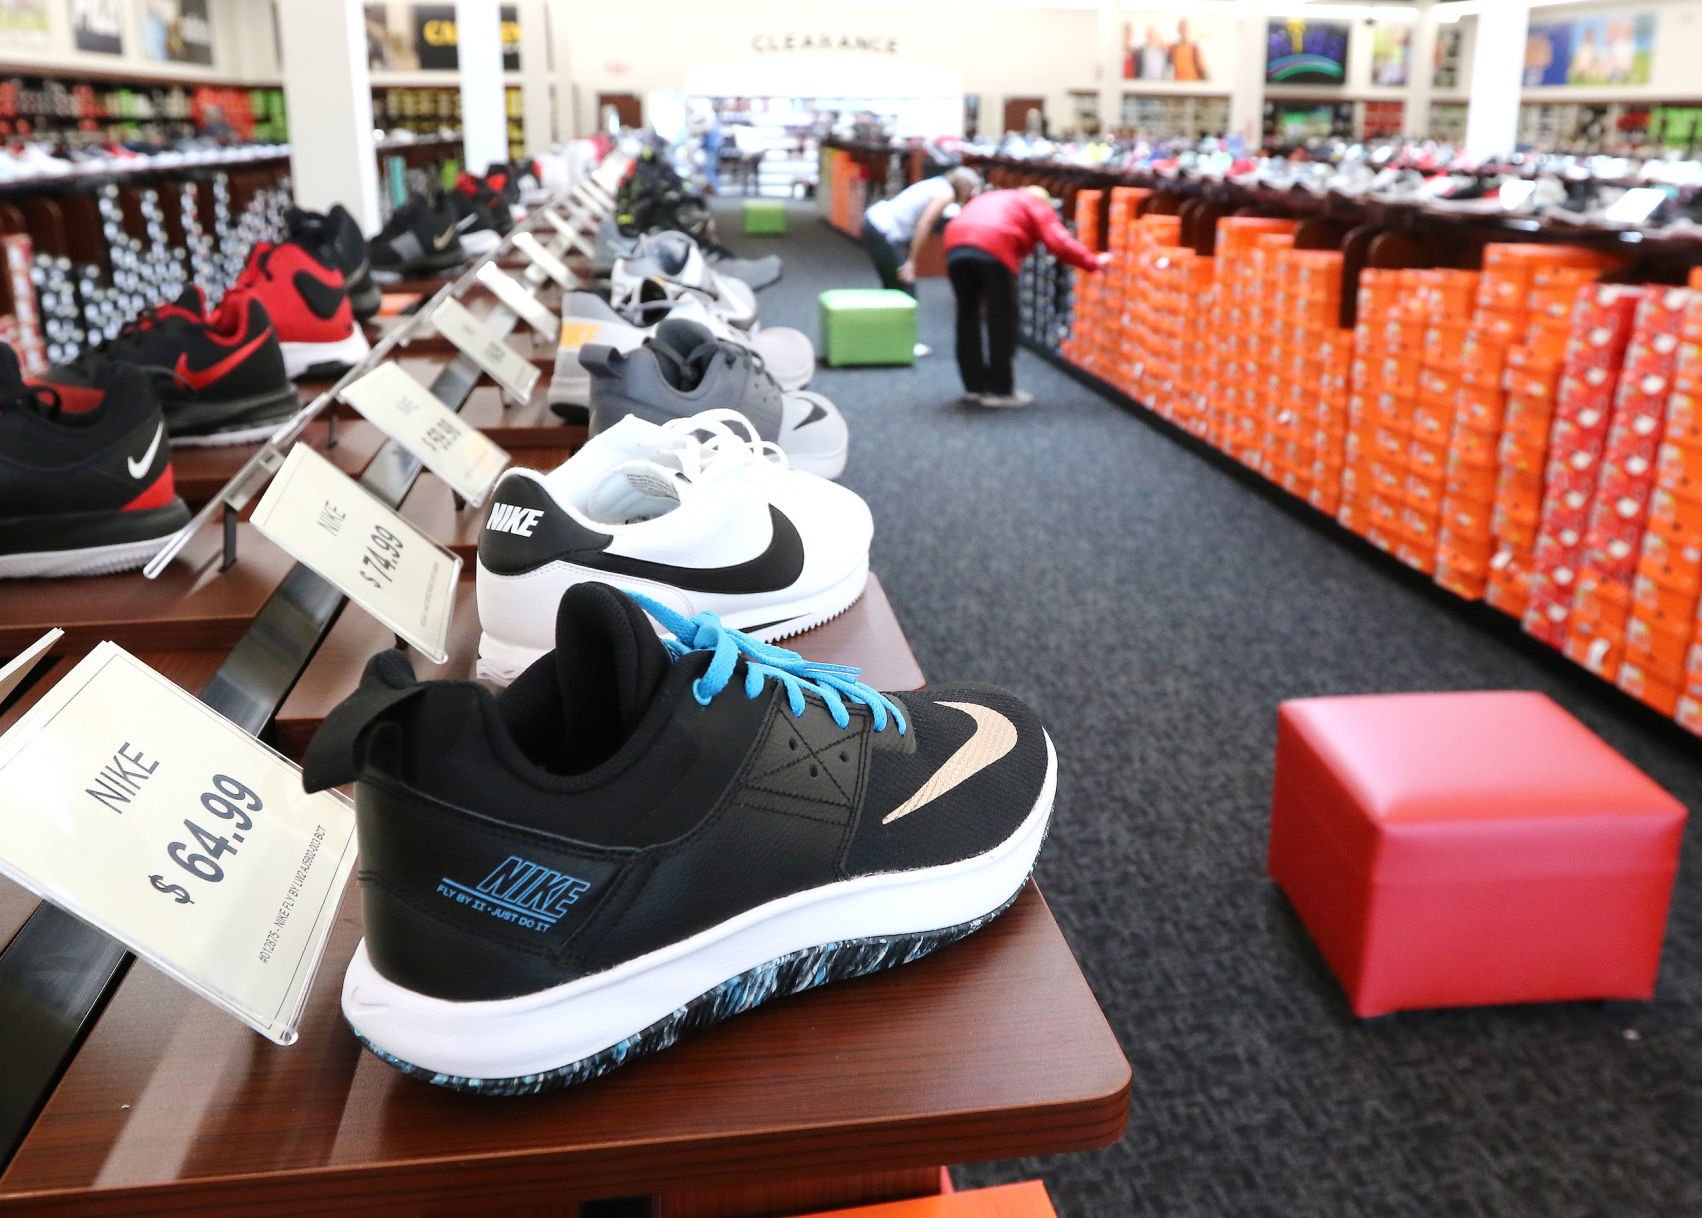 nike shoes at shoe department